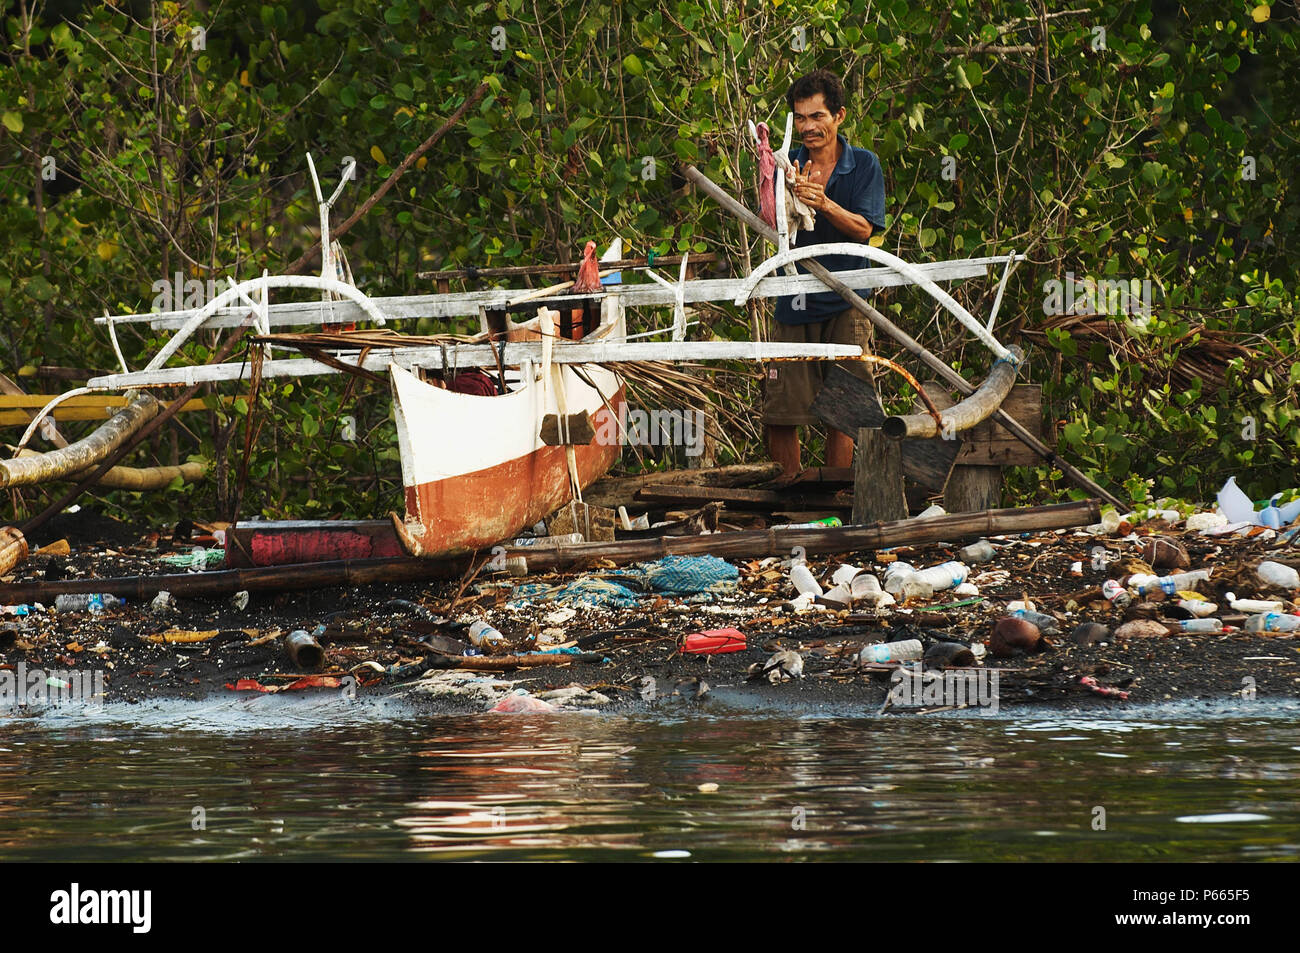 Indonesia, North Sulawesi, near Bitung, Lembeh Strait, Jukung, pollution on the beach. Stock Photo